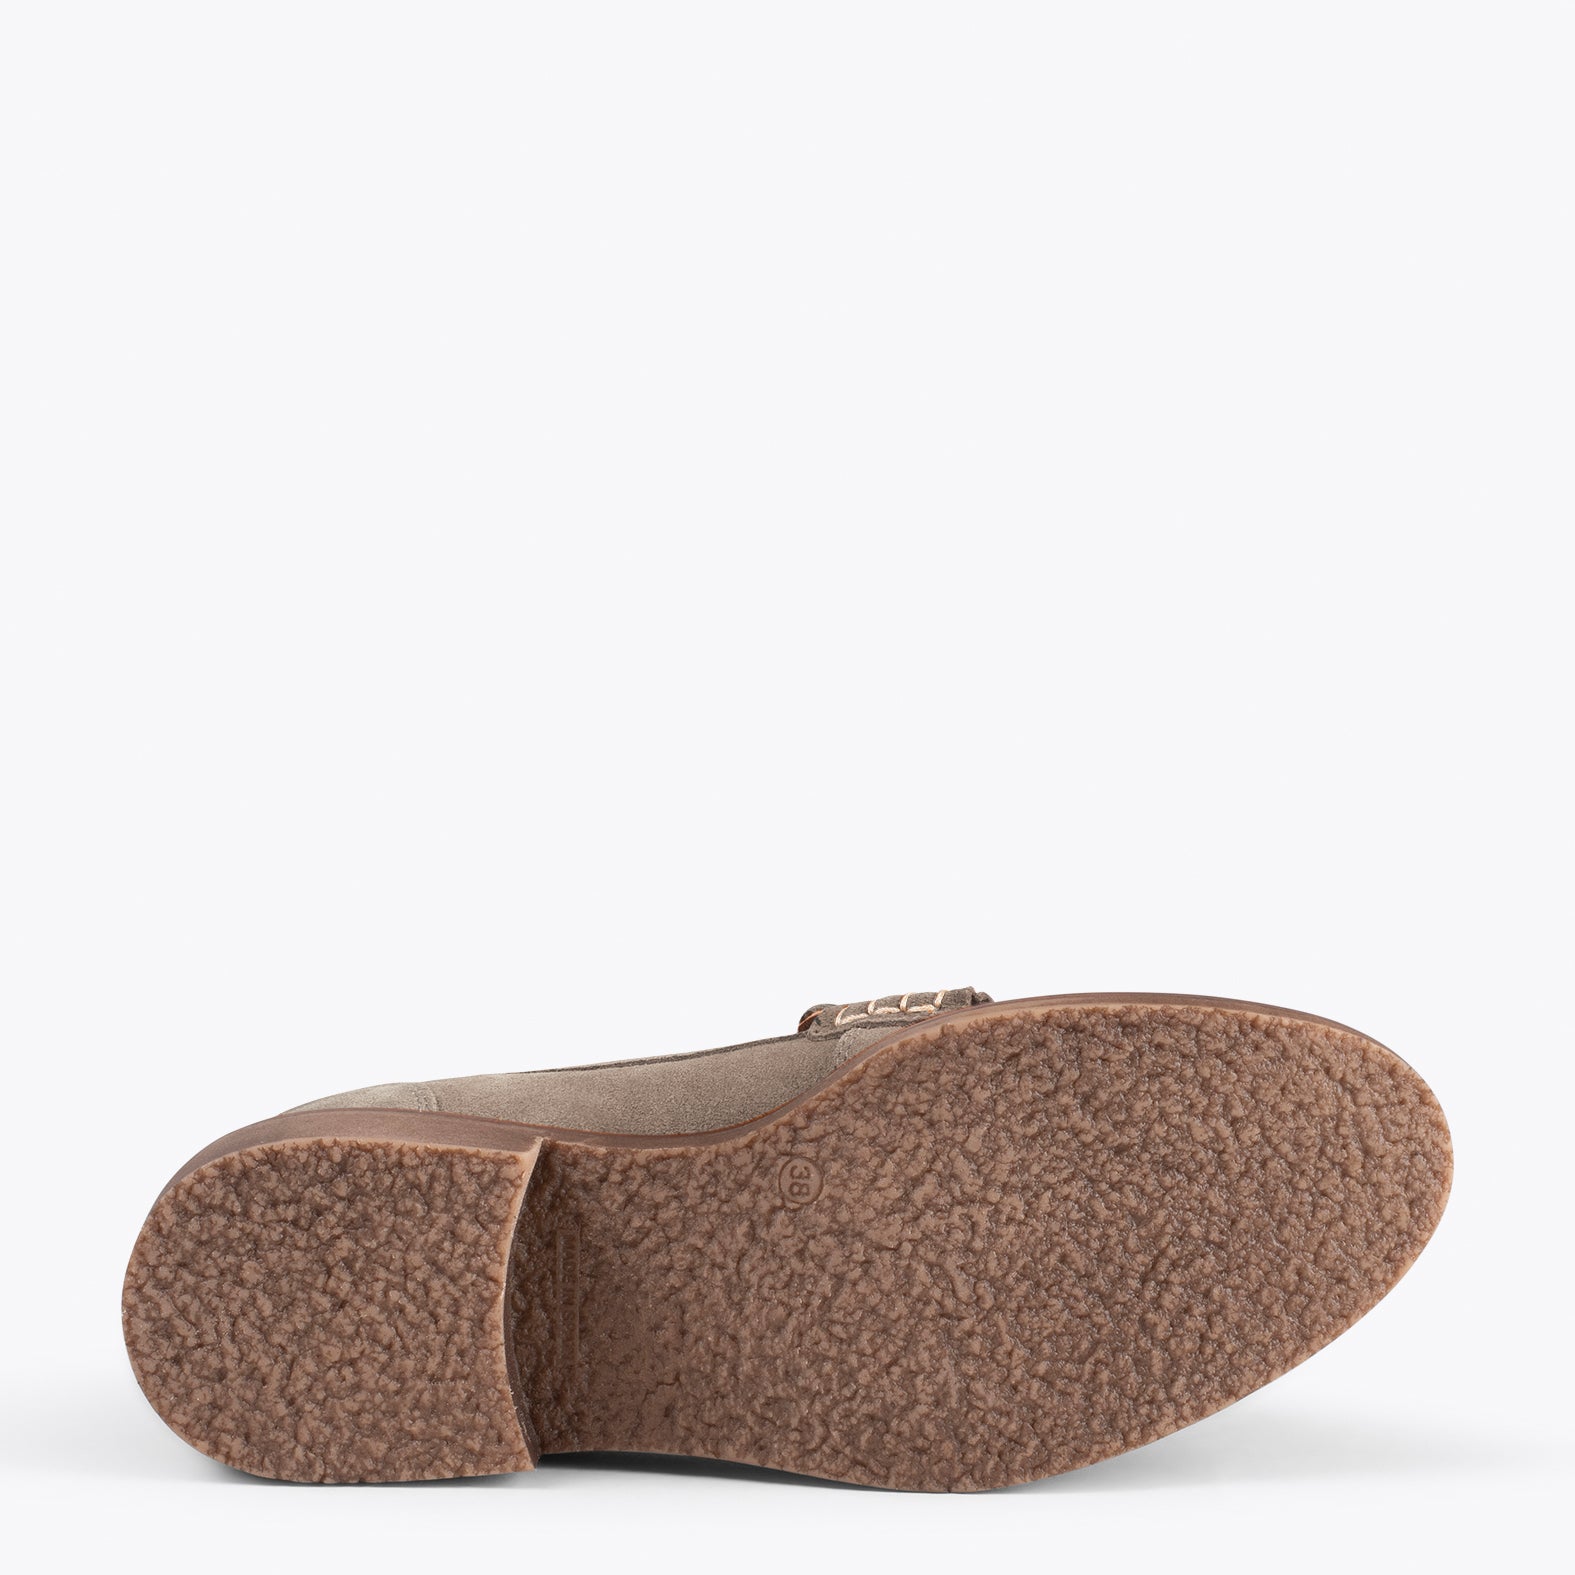 CASTELLANO – TAUPE moccasin with tassel